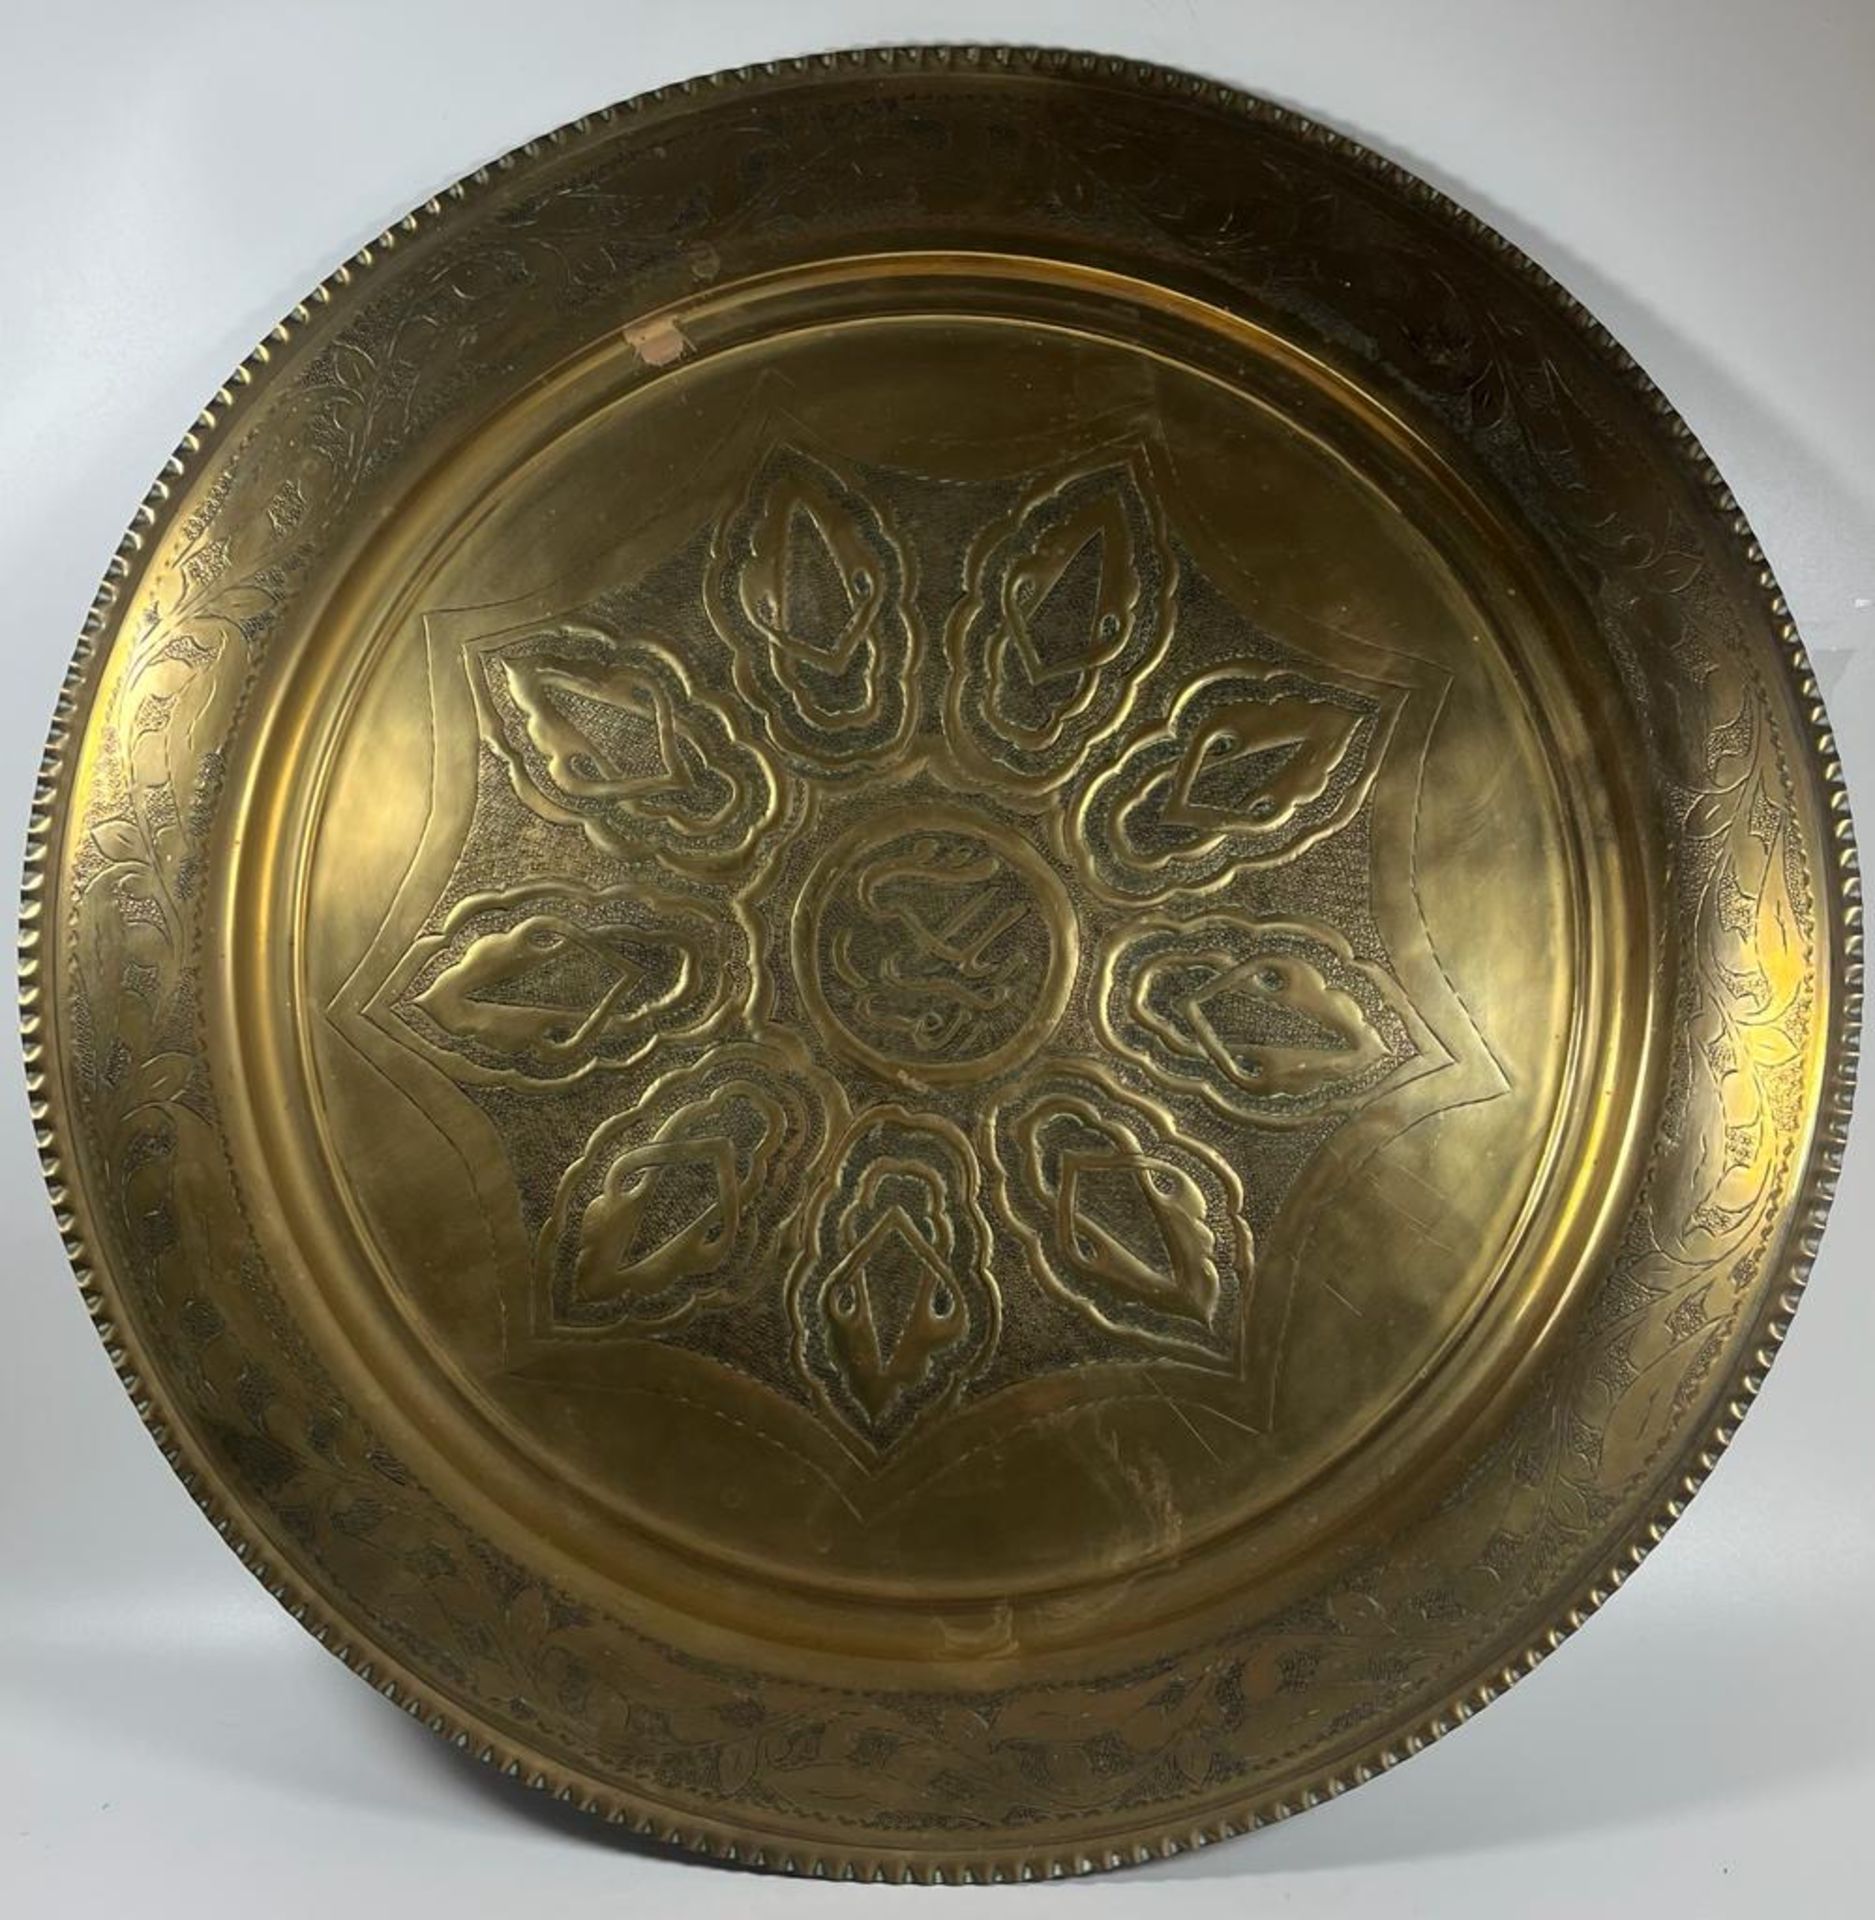 A LARGE ARTS & CRAFTS EARLY 20TH CENTURY BRASS CHARGER WITH STYLISED FLORAL DESIGN, DIAMETER 50 CM